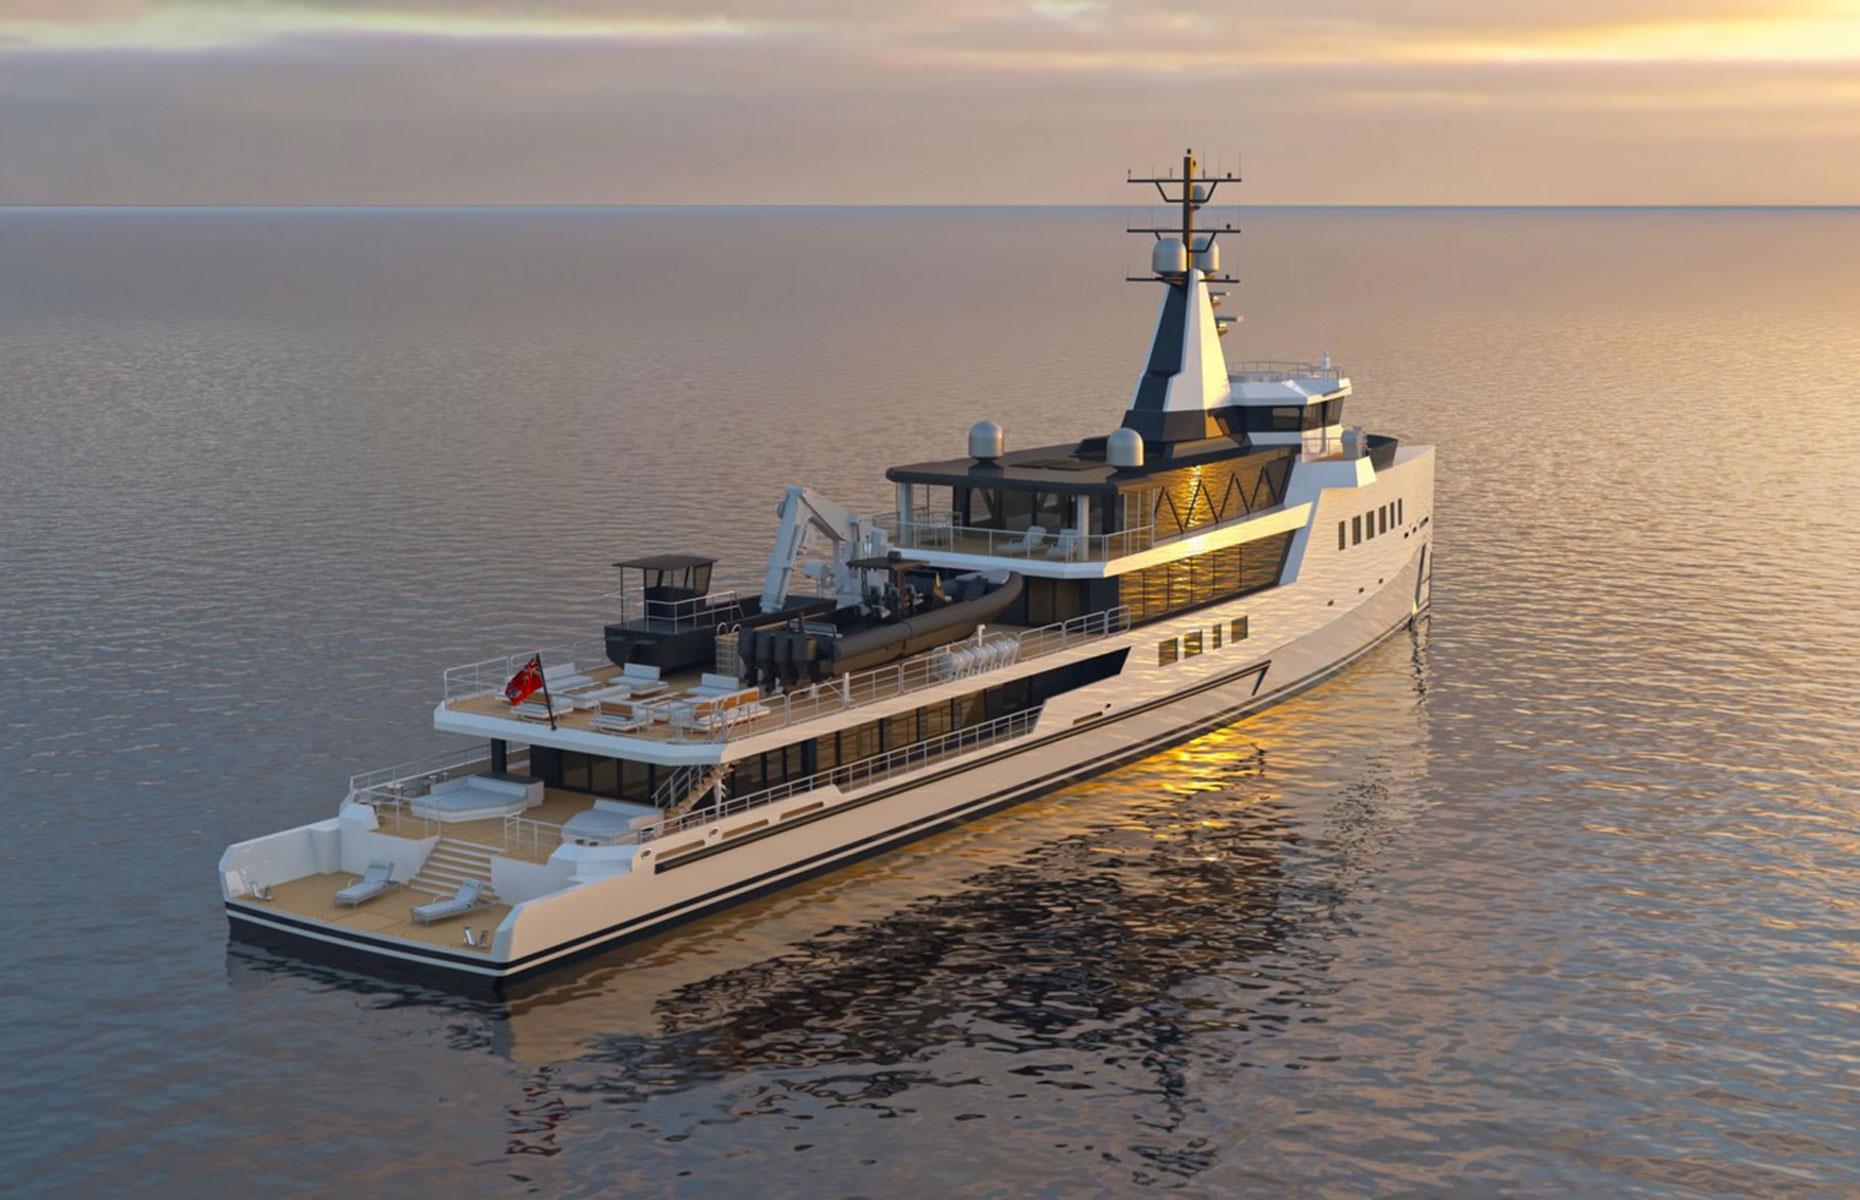 <p>Designed by innovative London studio Michael Leach Design and engineered in-house, the 247-foot <em>Custom YS 75 Hybrid</em> has cutting-edge features, including a touch-and-go helipad and a crane for deploying tenders.</p>  <p>It can accommodate 24 crew members and up to 12 guests across six staterooms and boasts plush entertaining areas.</p>  <p>Due to launch early this year, the innovative vessel will also be the first private superyacht equipped with commercial-grade cultivation pods to grow vegetables, further adding to its eco credentials. As for the price tag? Damen is keeping it firmly under wraps...</p>